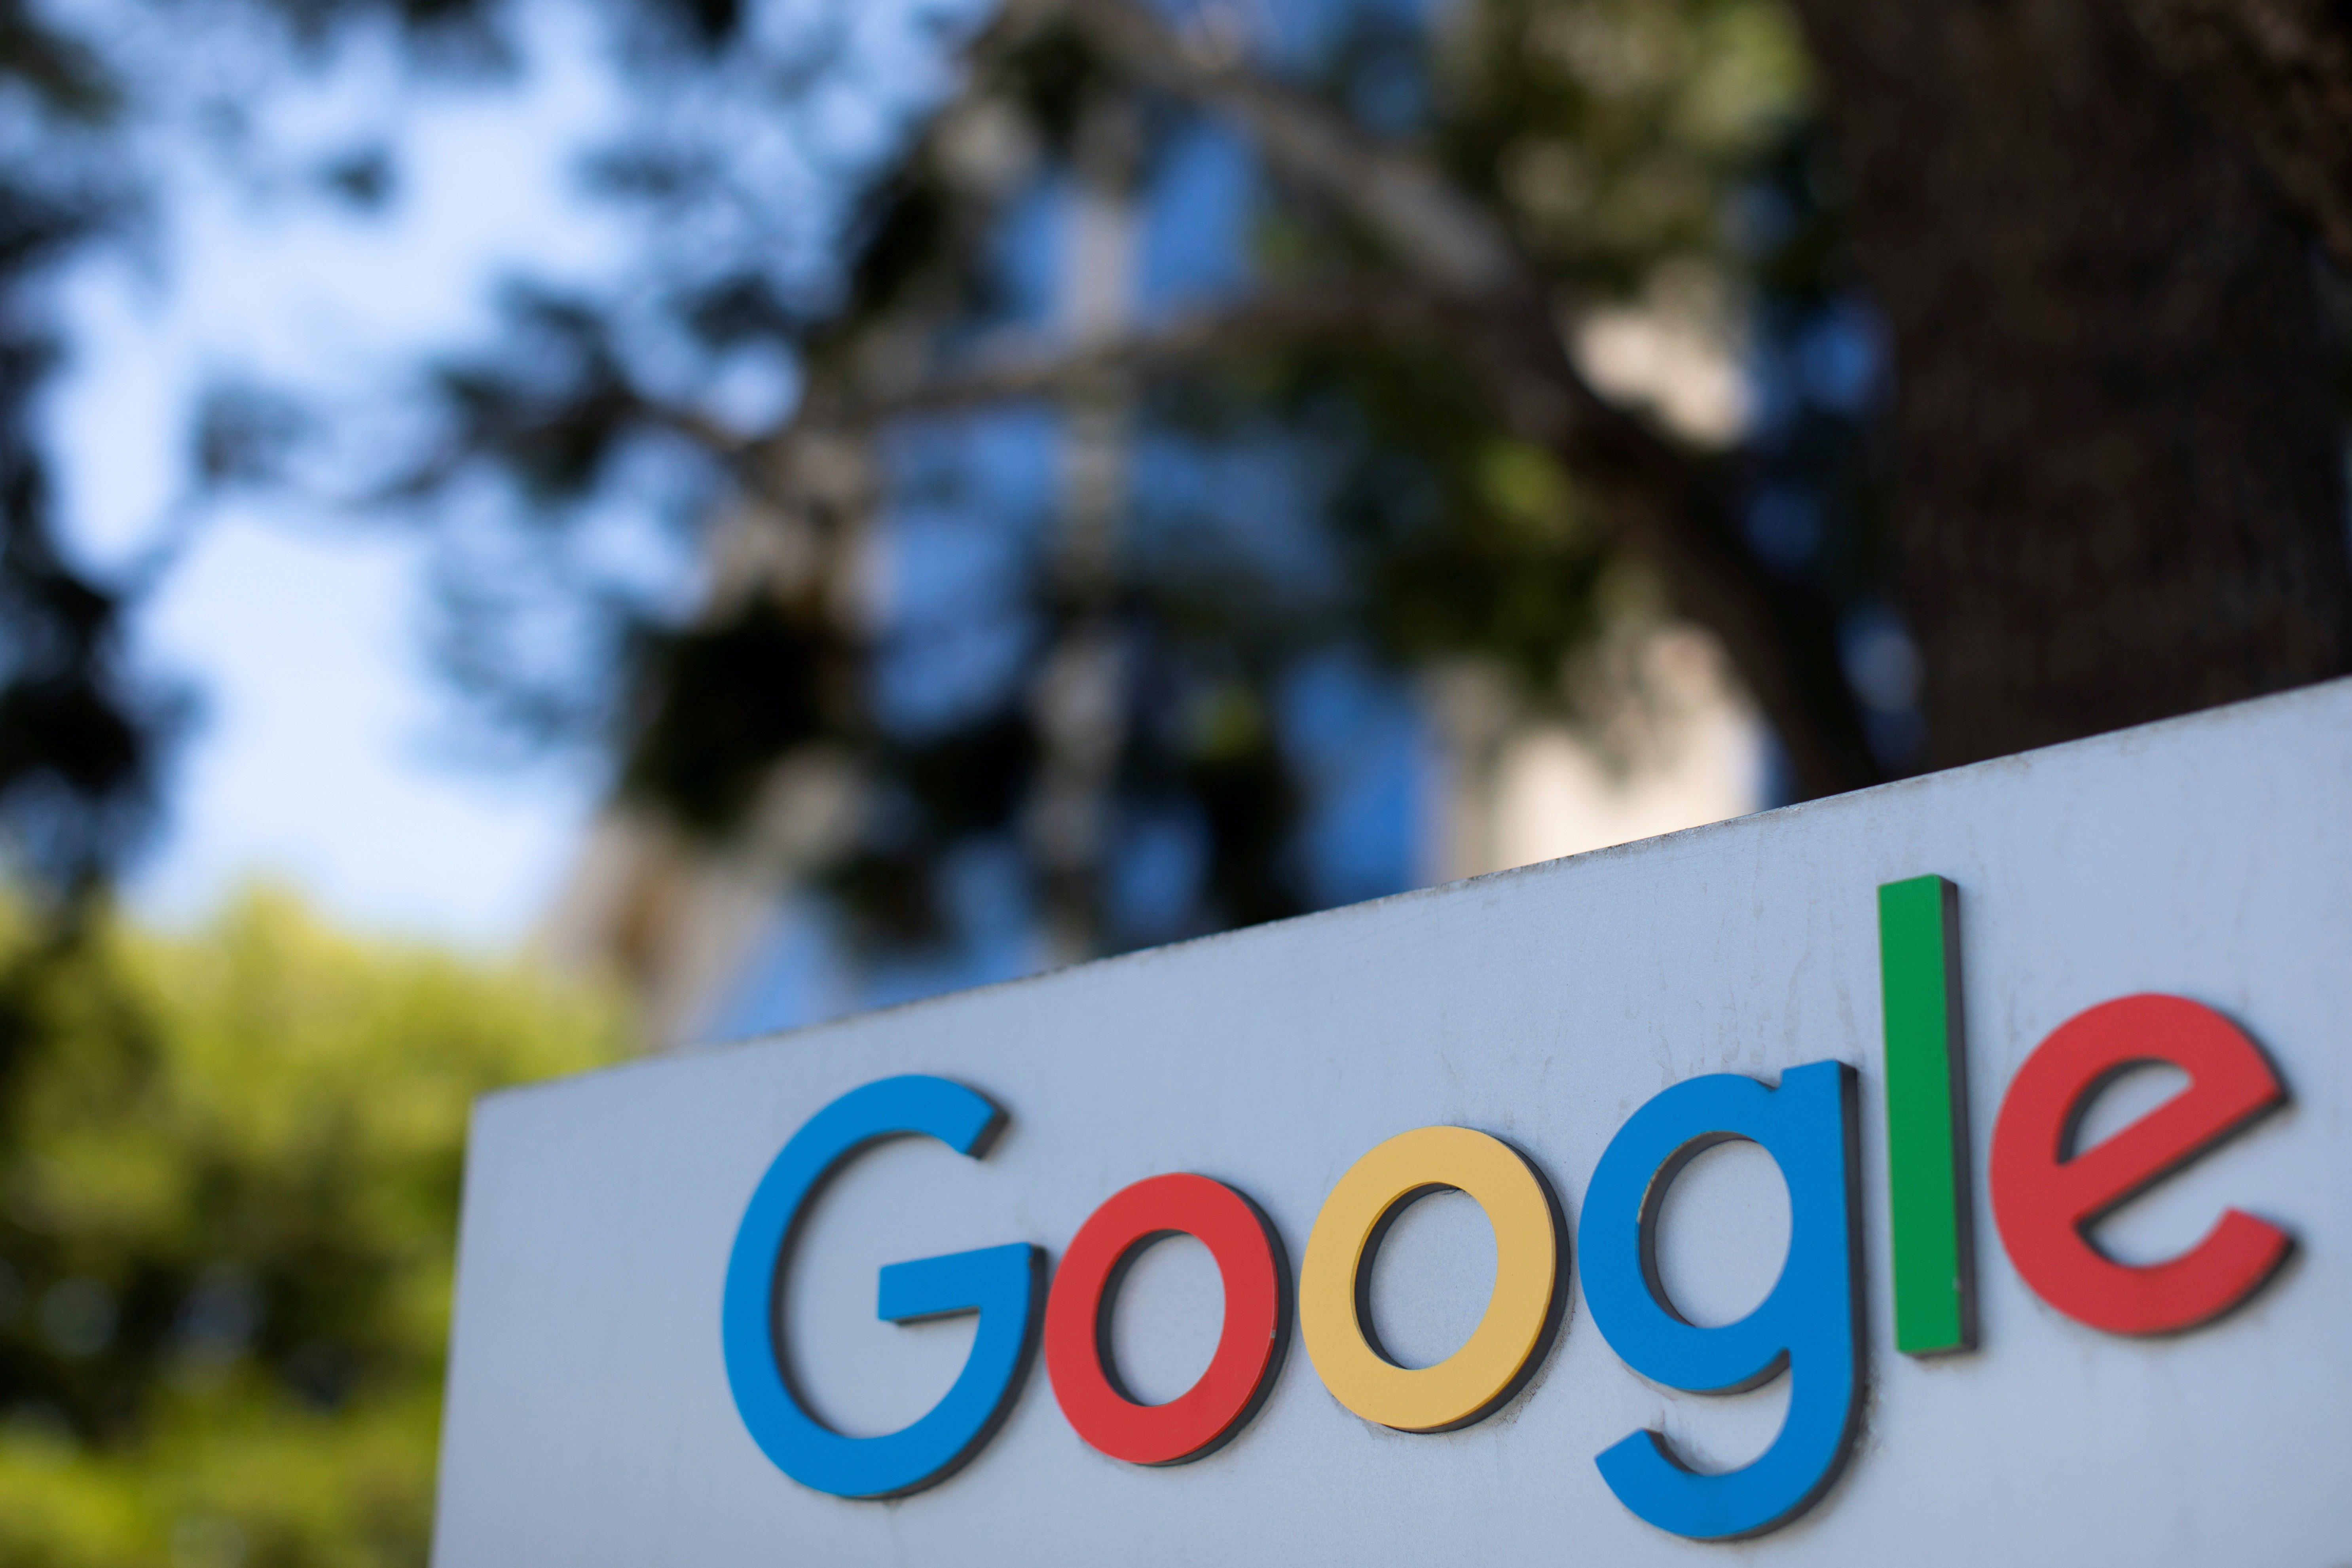 Google AI scientist Bengio resigns after colleagues’ firings – email